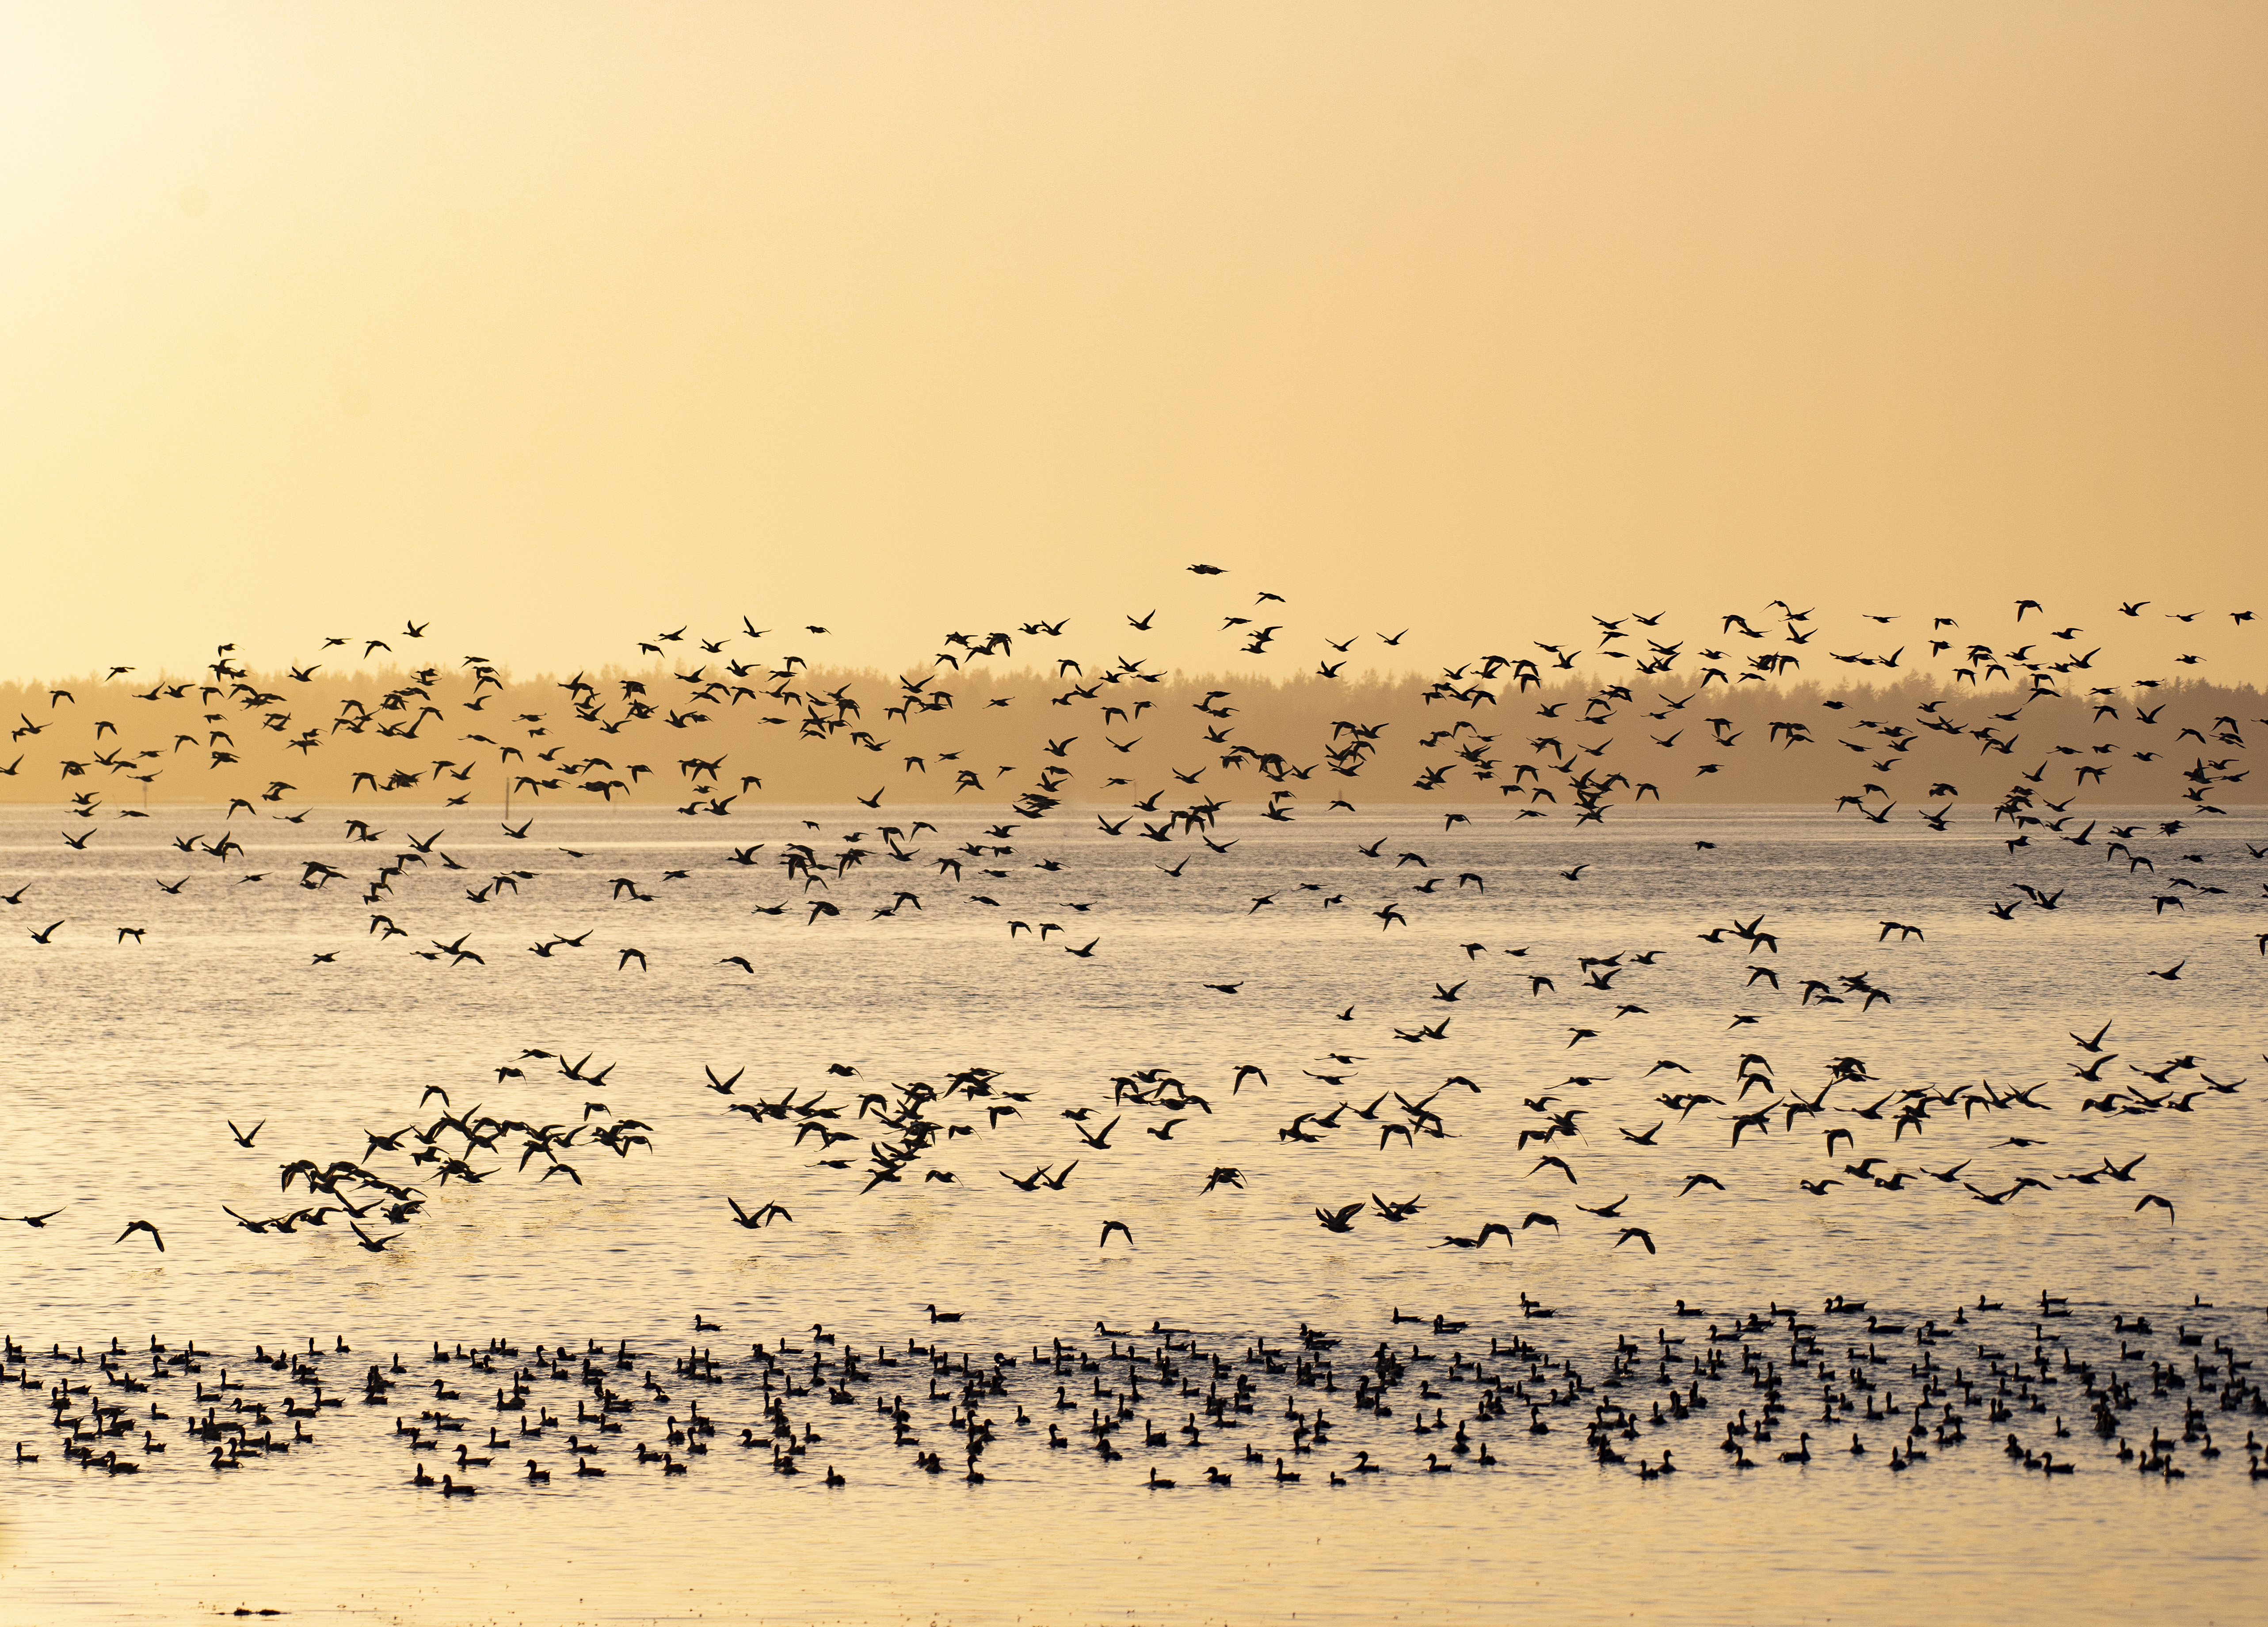 A large group of birds flies into an orange sunset with a hazy background of trees over water.